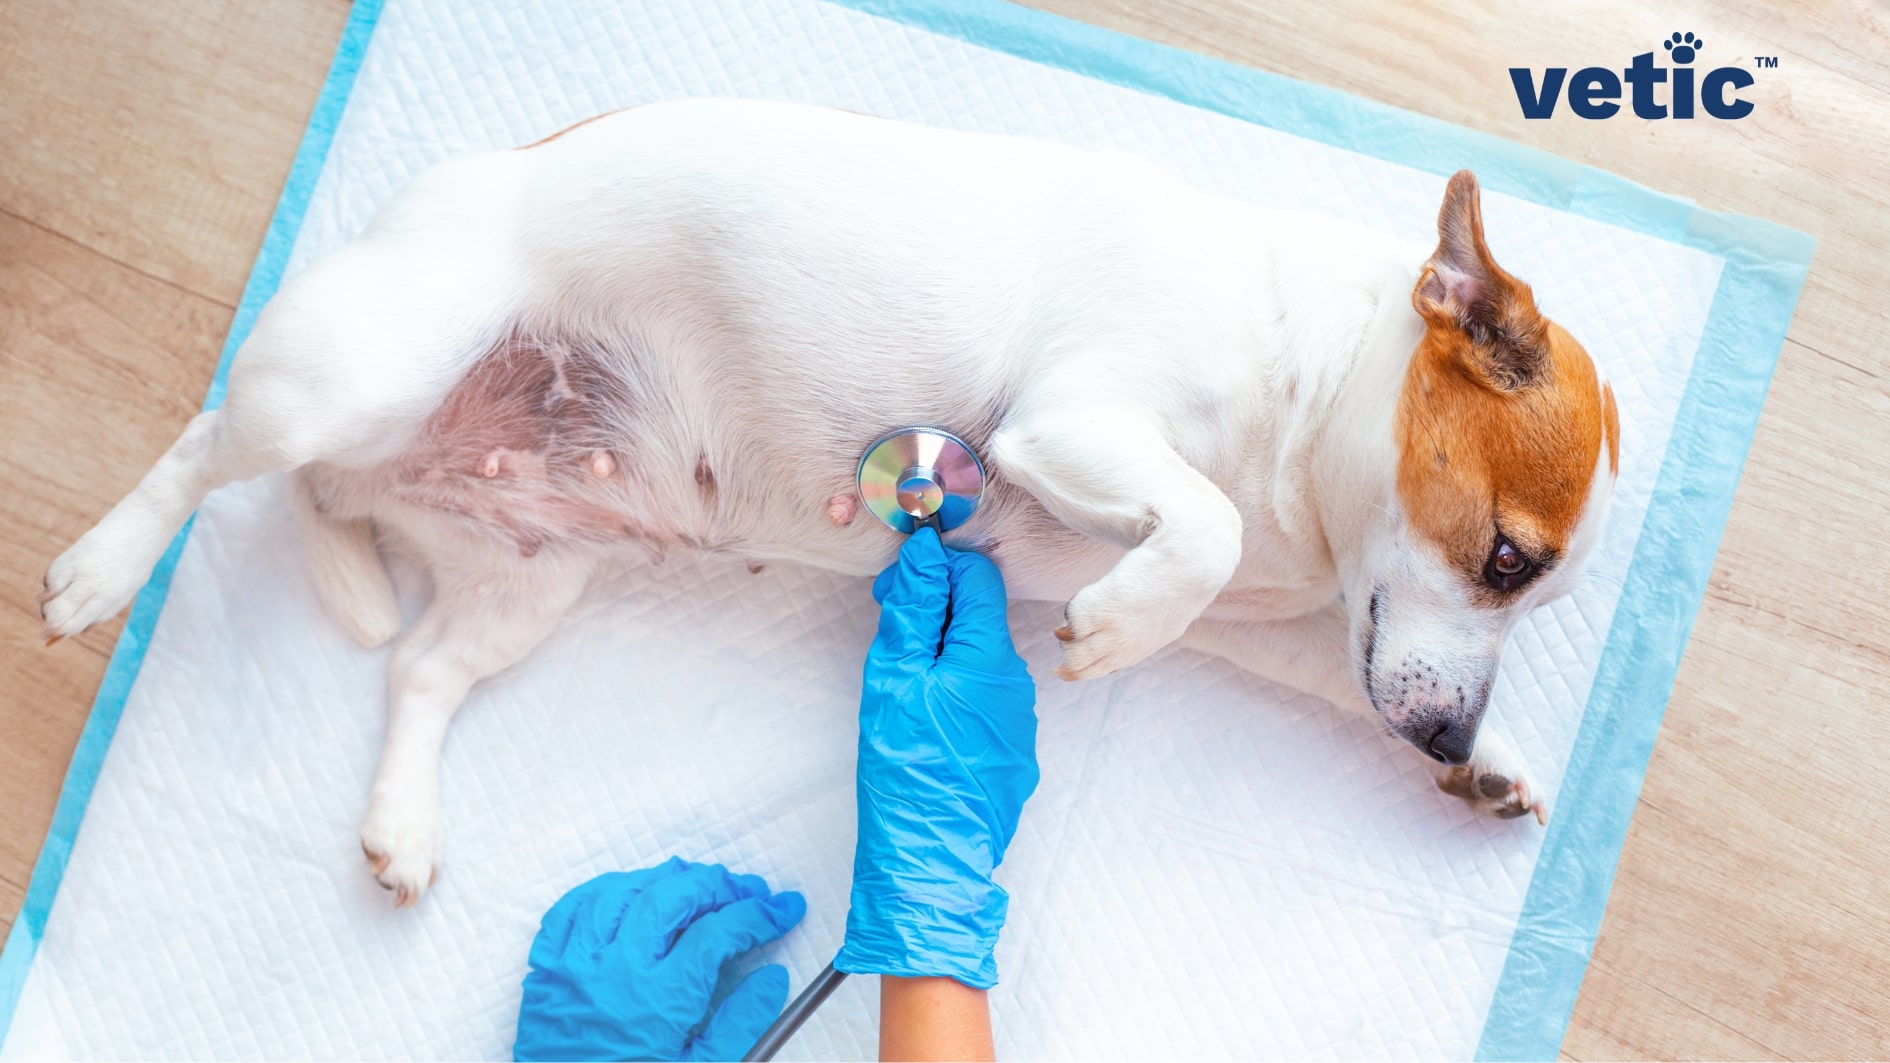 Adult female dog, mostly white with brown patches on her head, being examined with a stethoscope held by two gloved hands. Gastroenteritis in dogs doesn't depend on age or gender. it is an emergency condition that demands veterinary attention